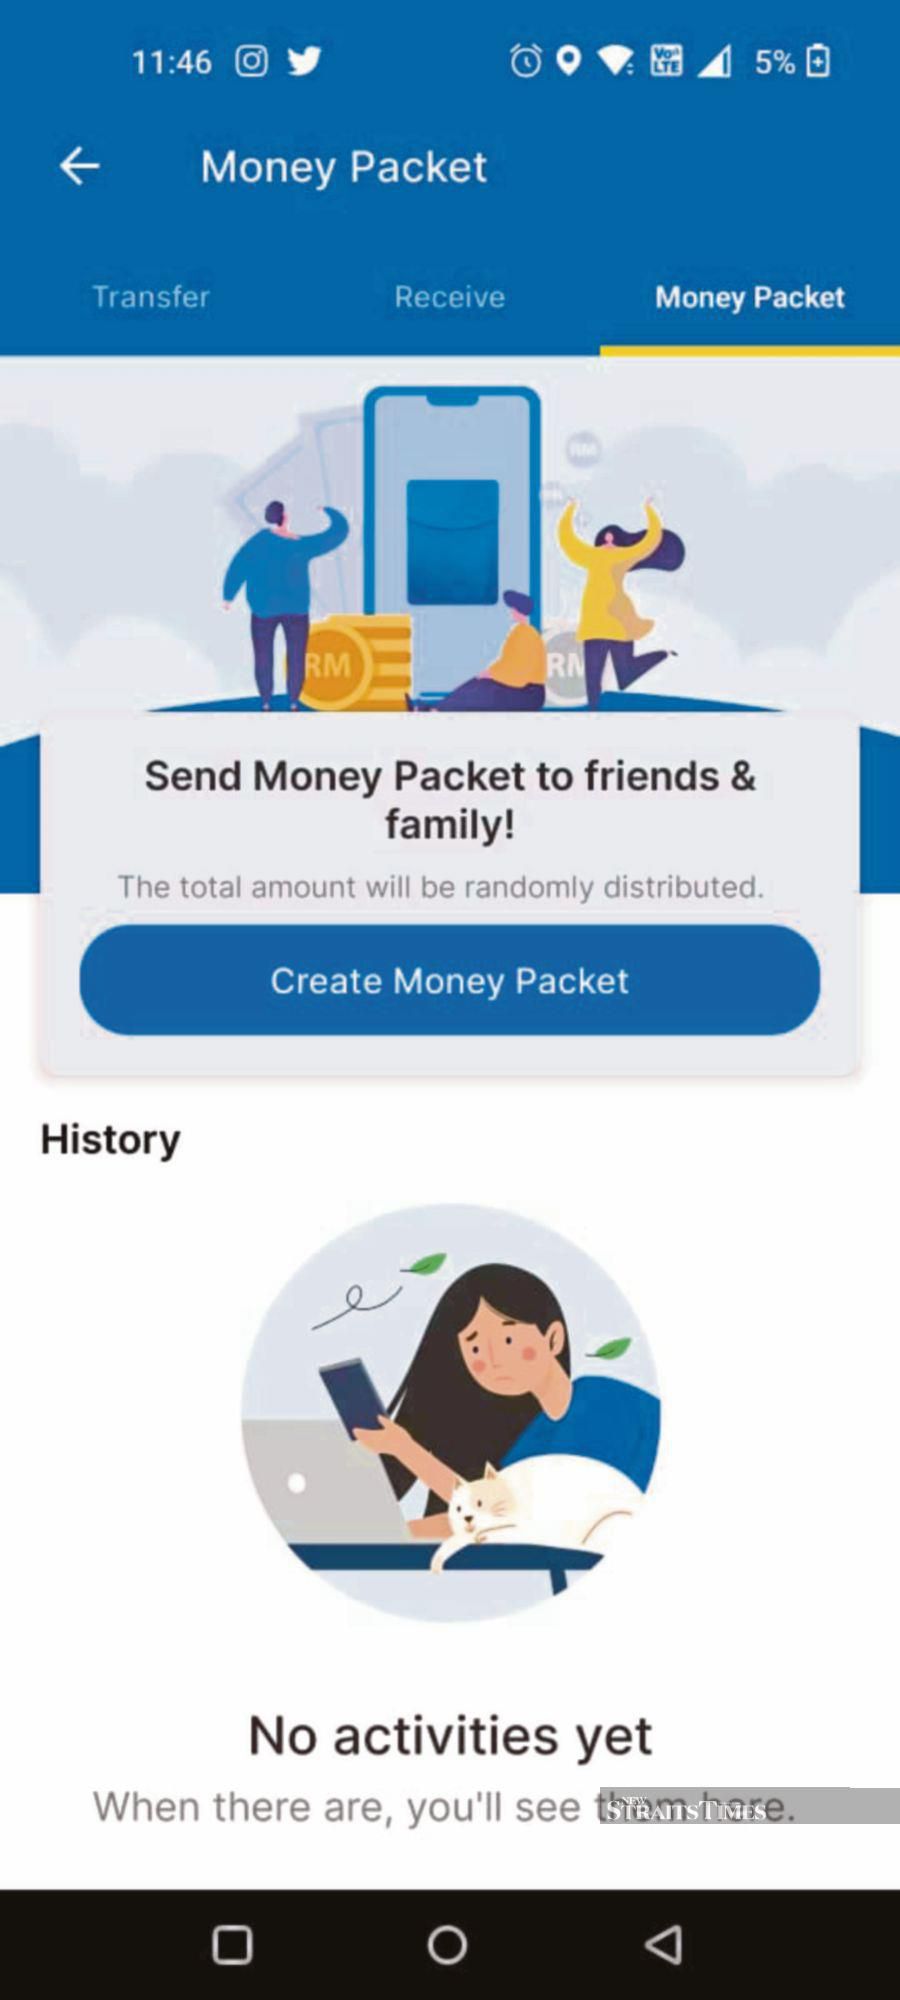 Money packet feature from Touch ‘n Go.